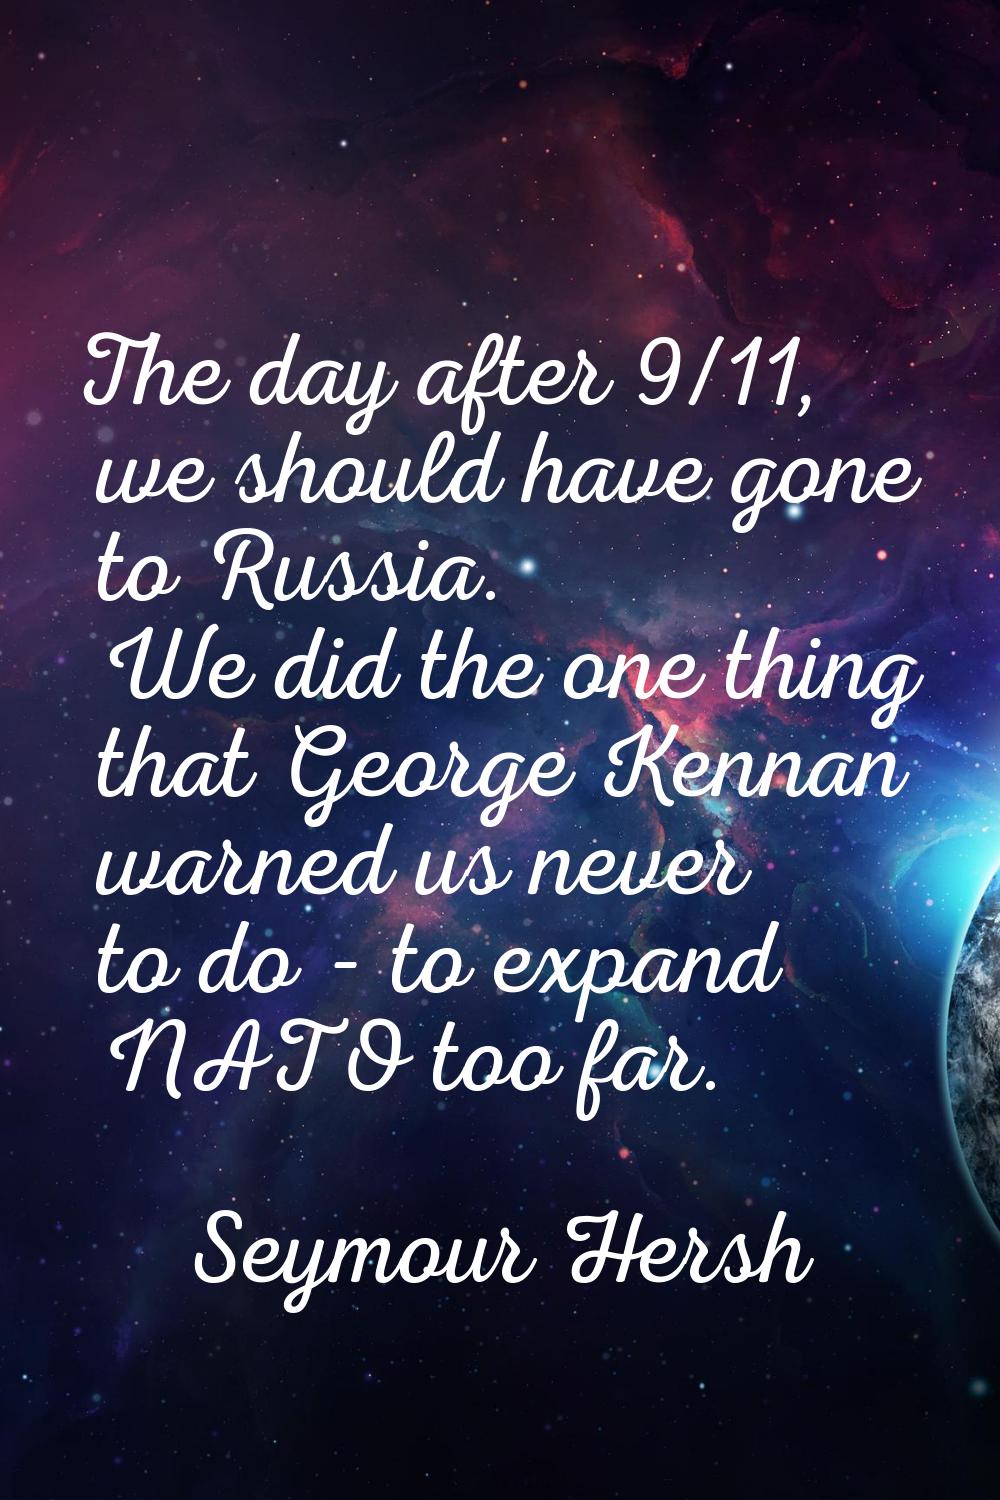 The day after 9/11, we should have gone to Russia. We did the one thing that George Kennan warned u